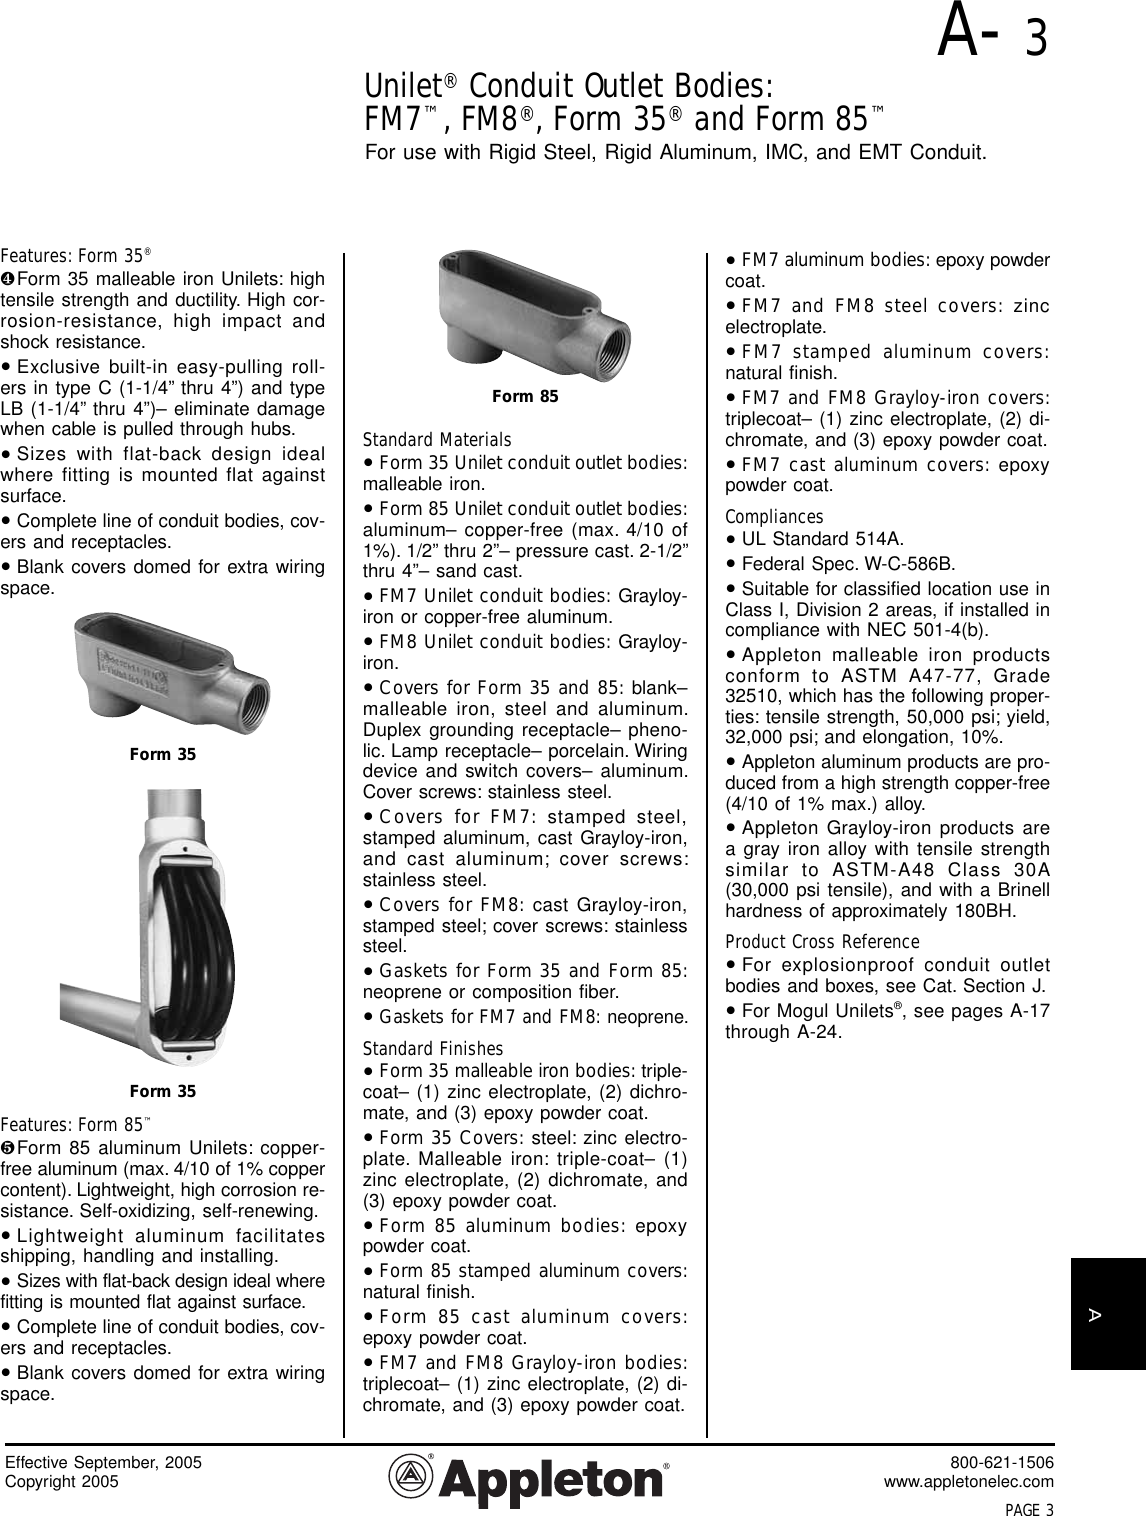 Page 2 of 6 - 297201-Catalog